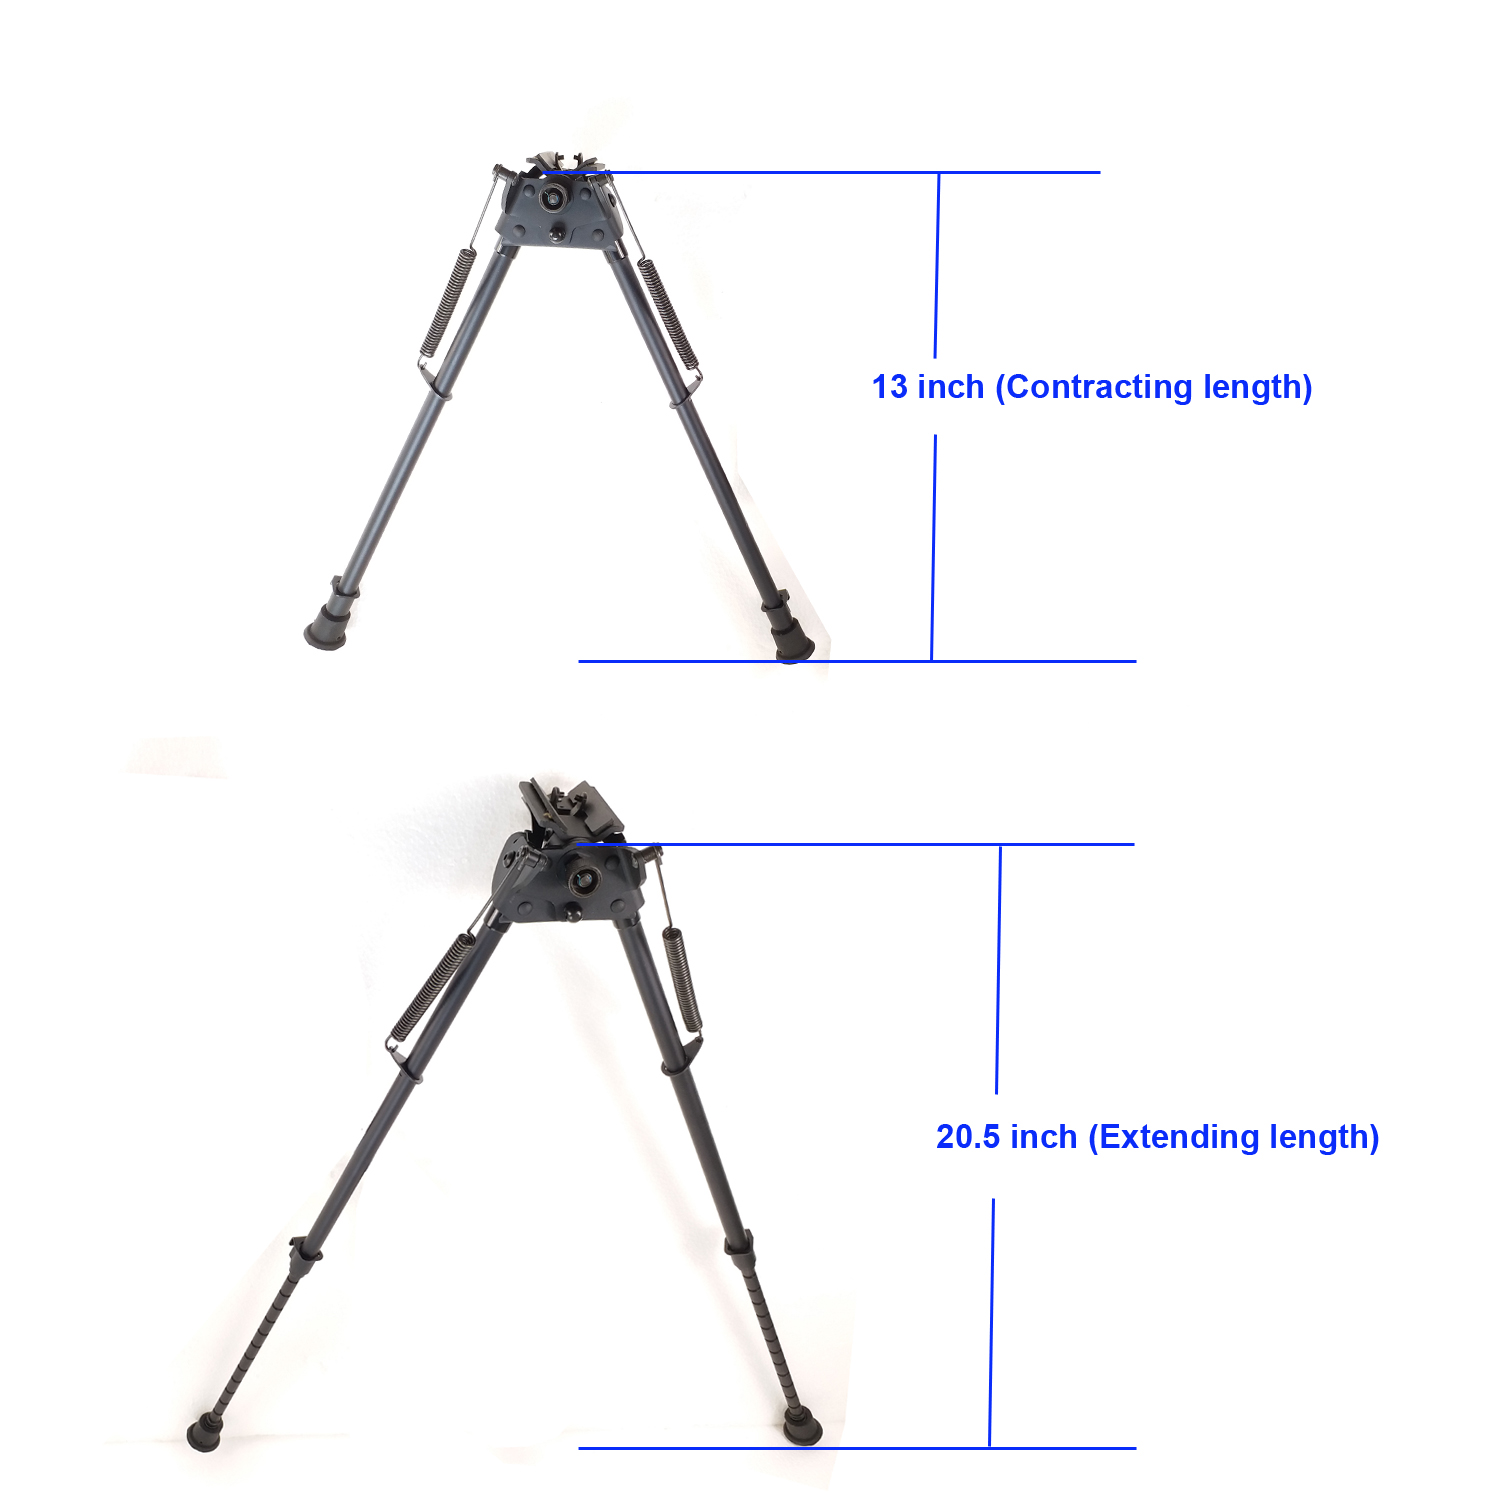 6-9,9-13,13-21 Inch Harris Style Bipod Tiltable Pivot Spring Return adjustable and Locked height BE-xB